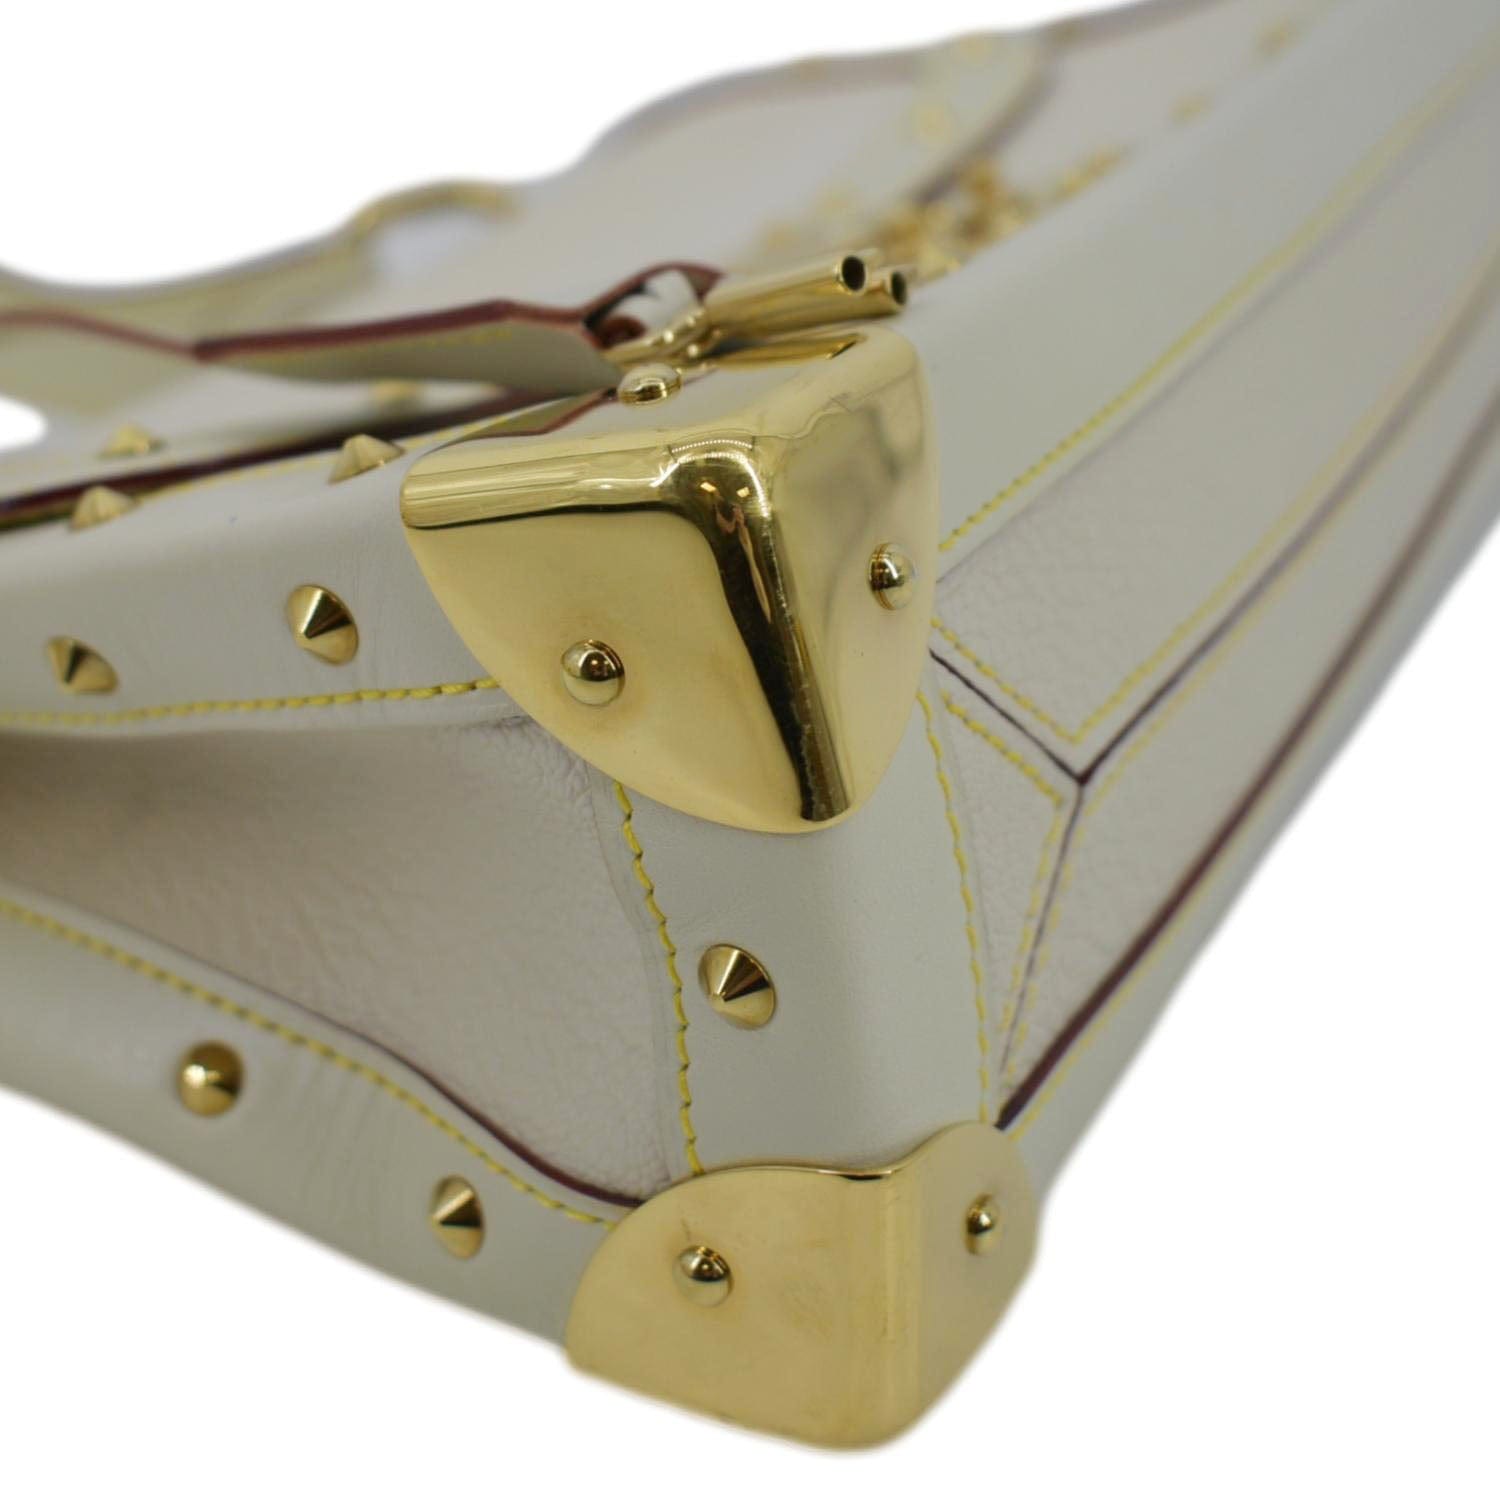 White Suhali leather Louis Vuitton Le Favori wallet with brass